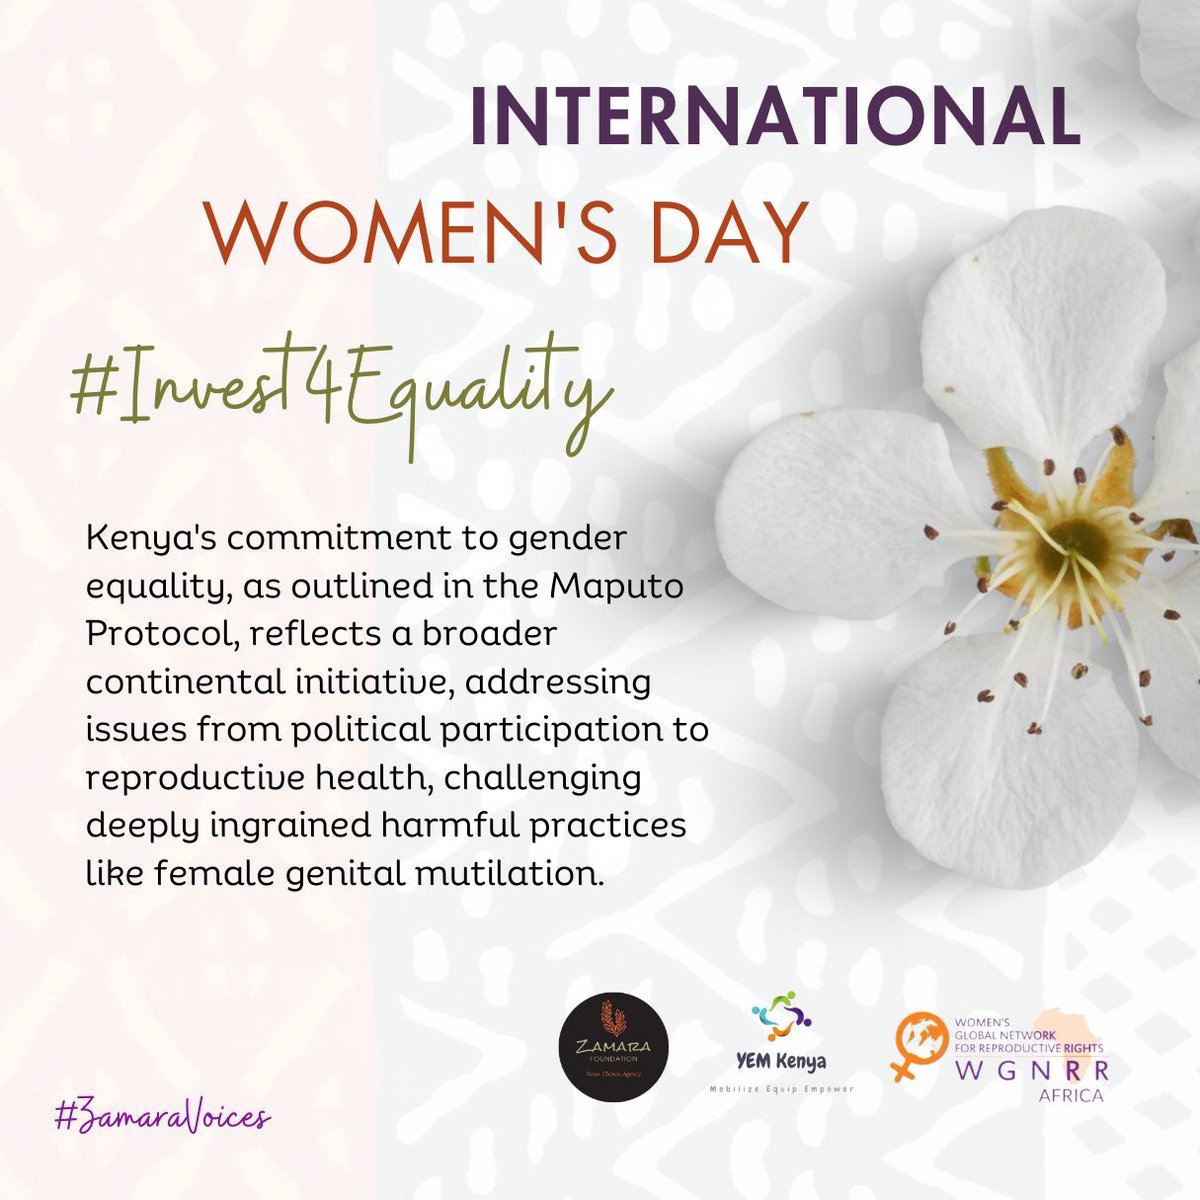 Strategic investments in girls' education and women's empowerment are crucial steps towards achieving gender equality and sustainable development.
#Invest4Equality 
#ZamaraVoices